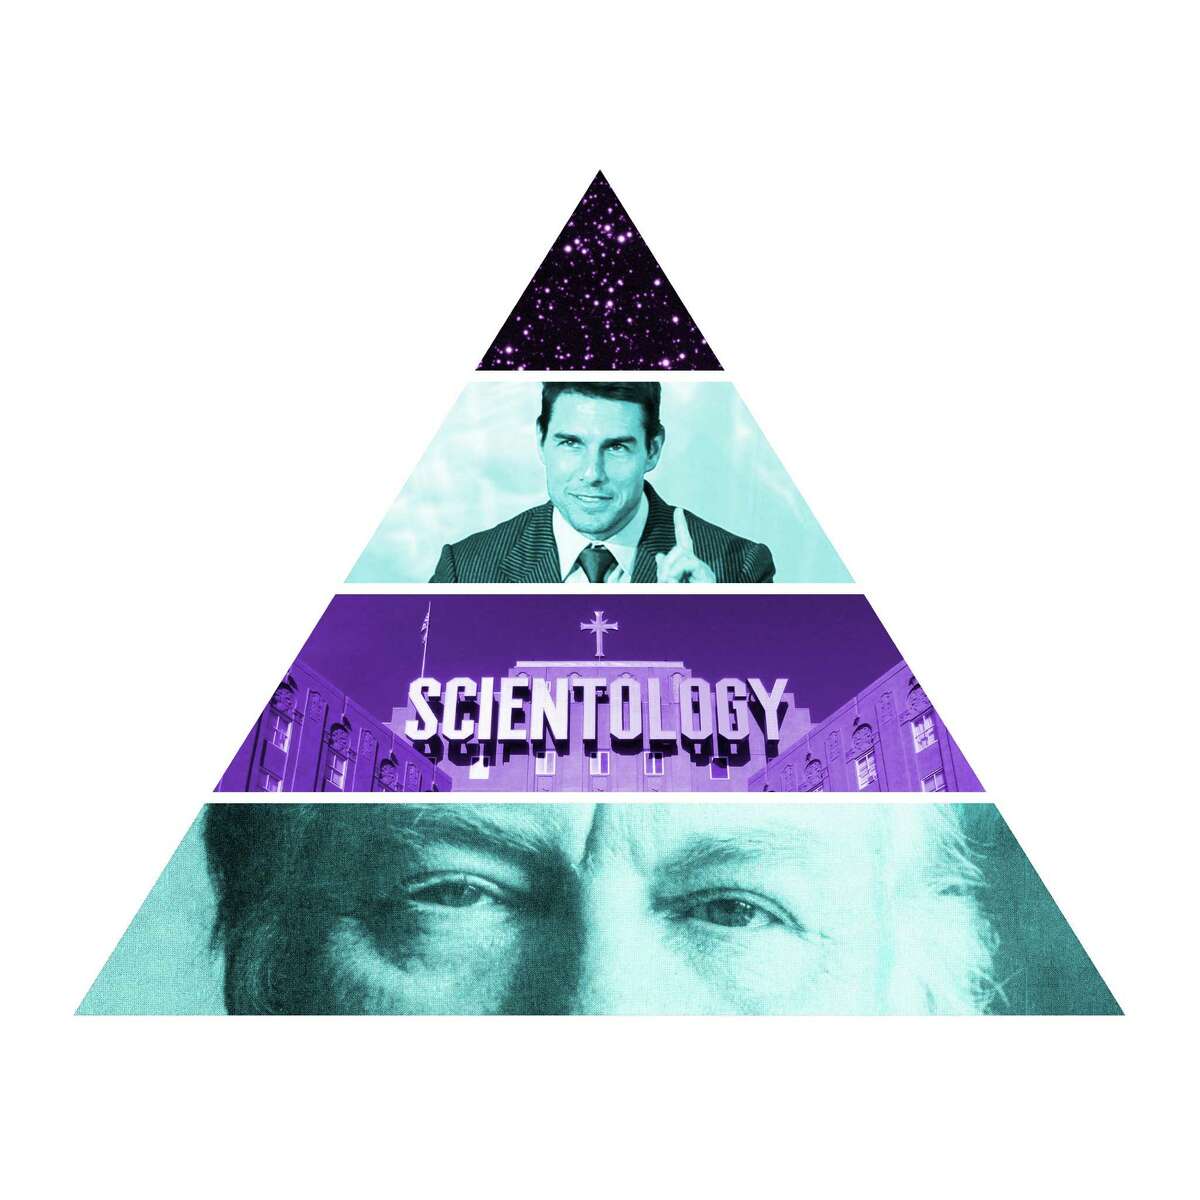 A History Of Scientology 